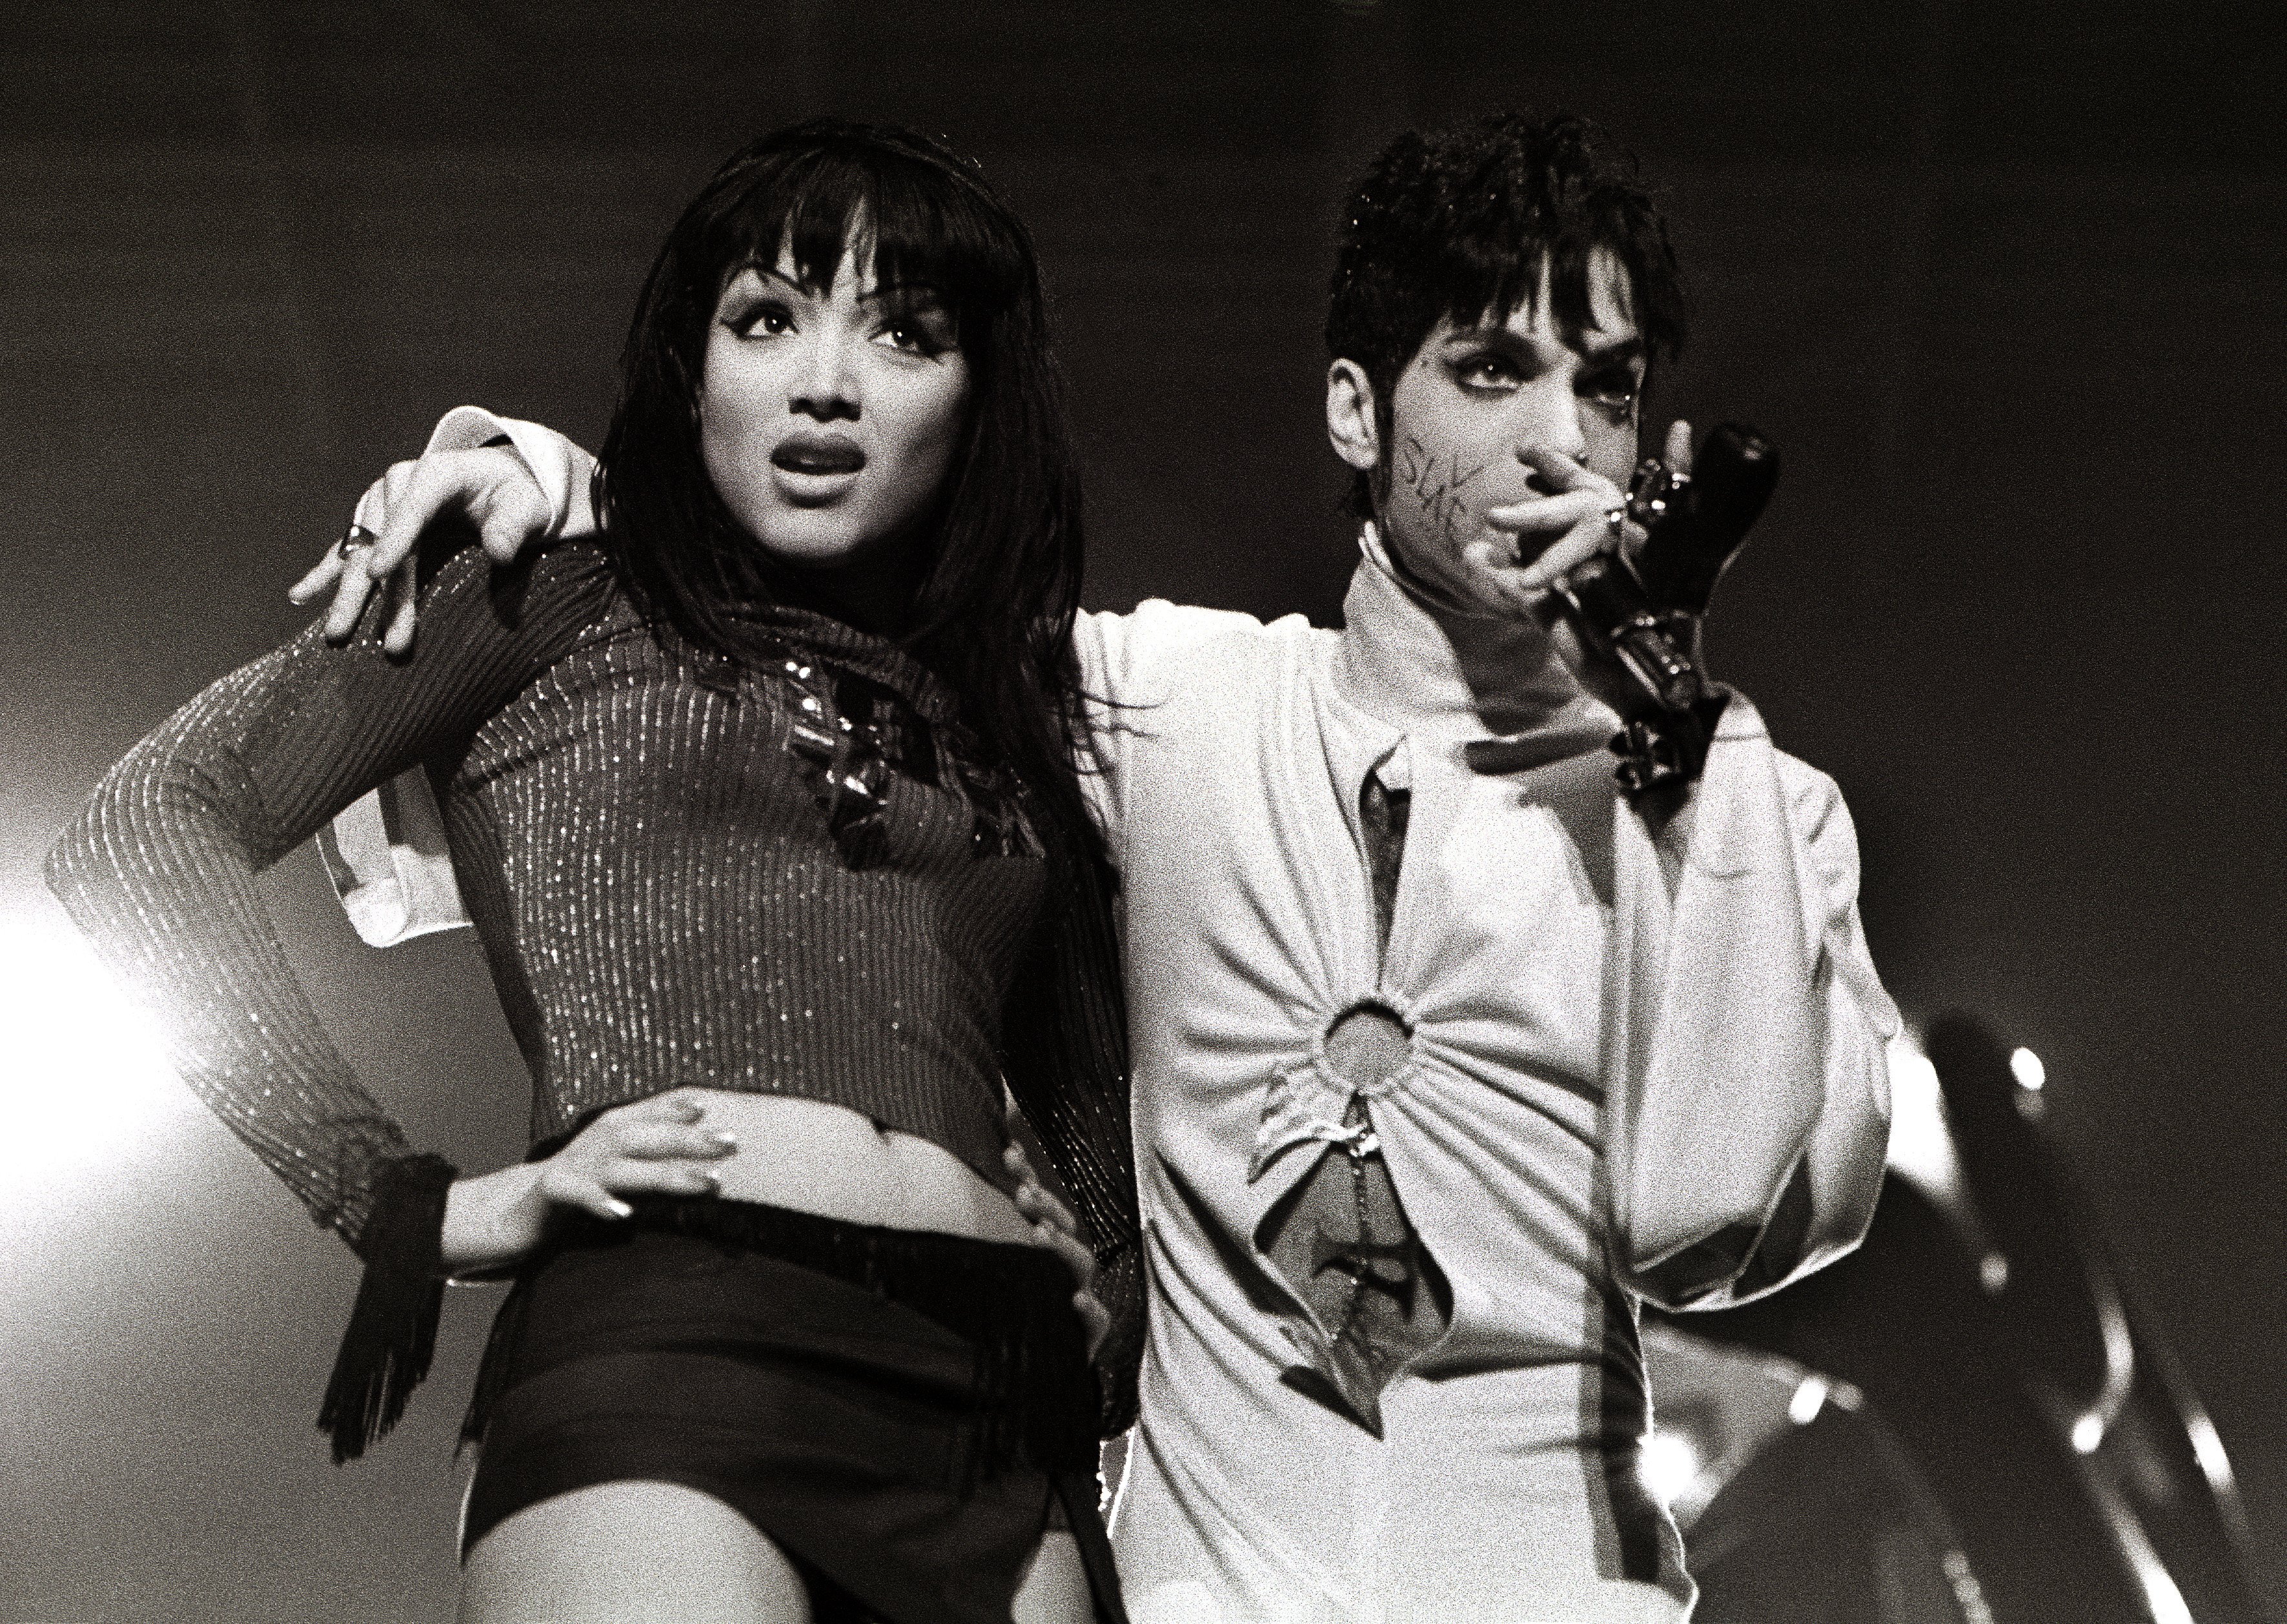 Prince and Mayte Garcia perform on stage at Brabant hallen, Den Bosch, Netherllands, 24th March 1995. | Photo: GettyImages